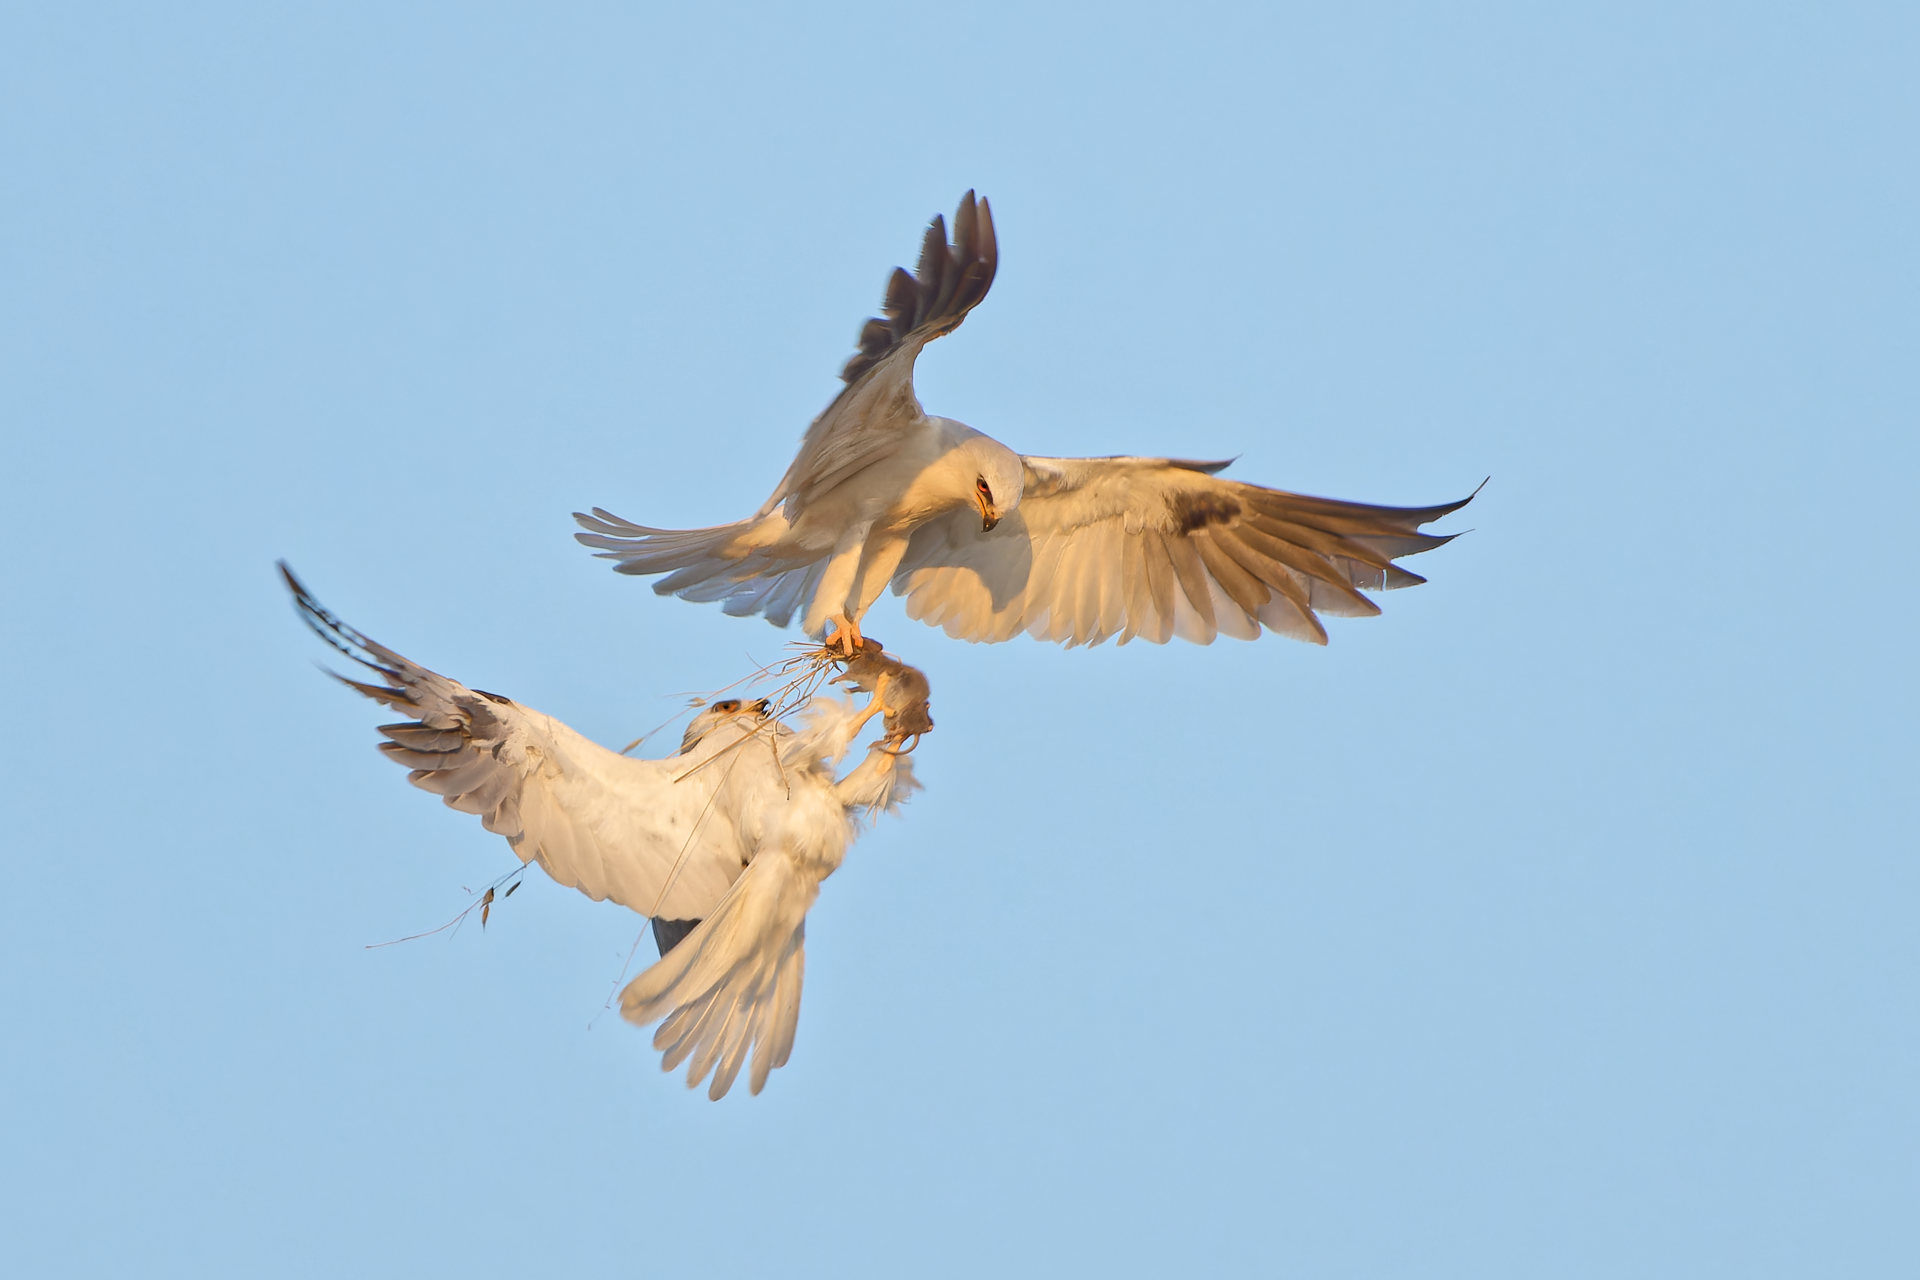 Two white-tailed kites perform a food exchange in Ed R. Levin County Park in San Jose. Parham Pourahmad, a 14 year old from Los Gatos who won in 2024's Audubon Photography Awards, captured the image in his ongoing project of documenting the raptors in the public park. (Parham Pourahmad)